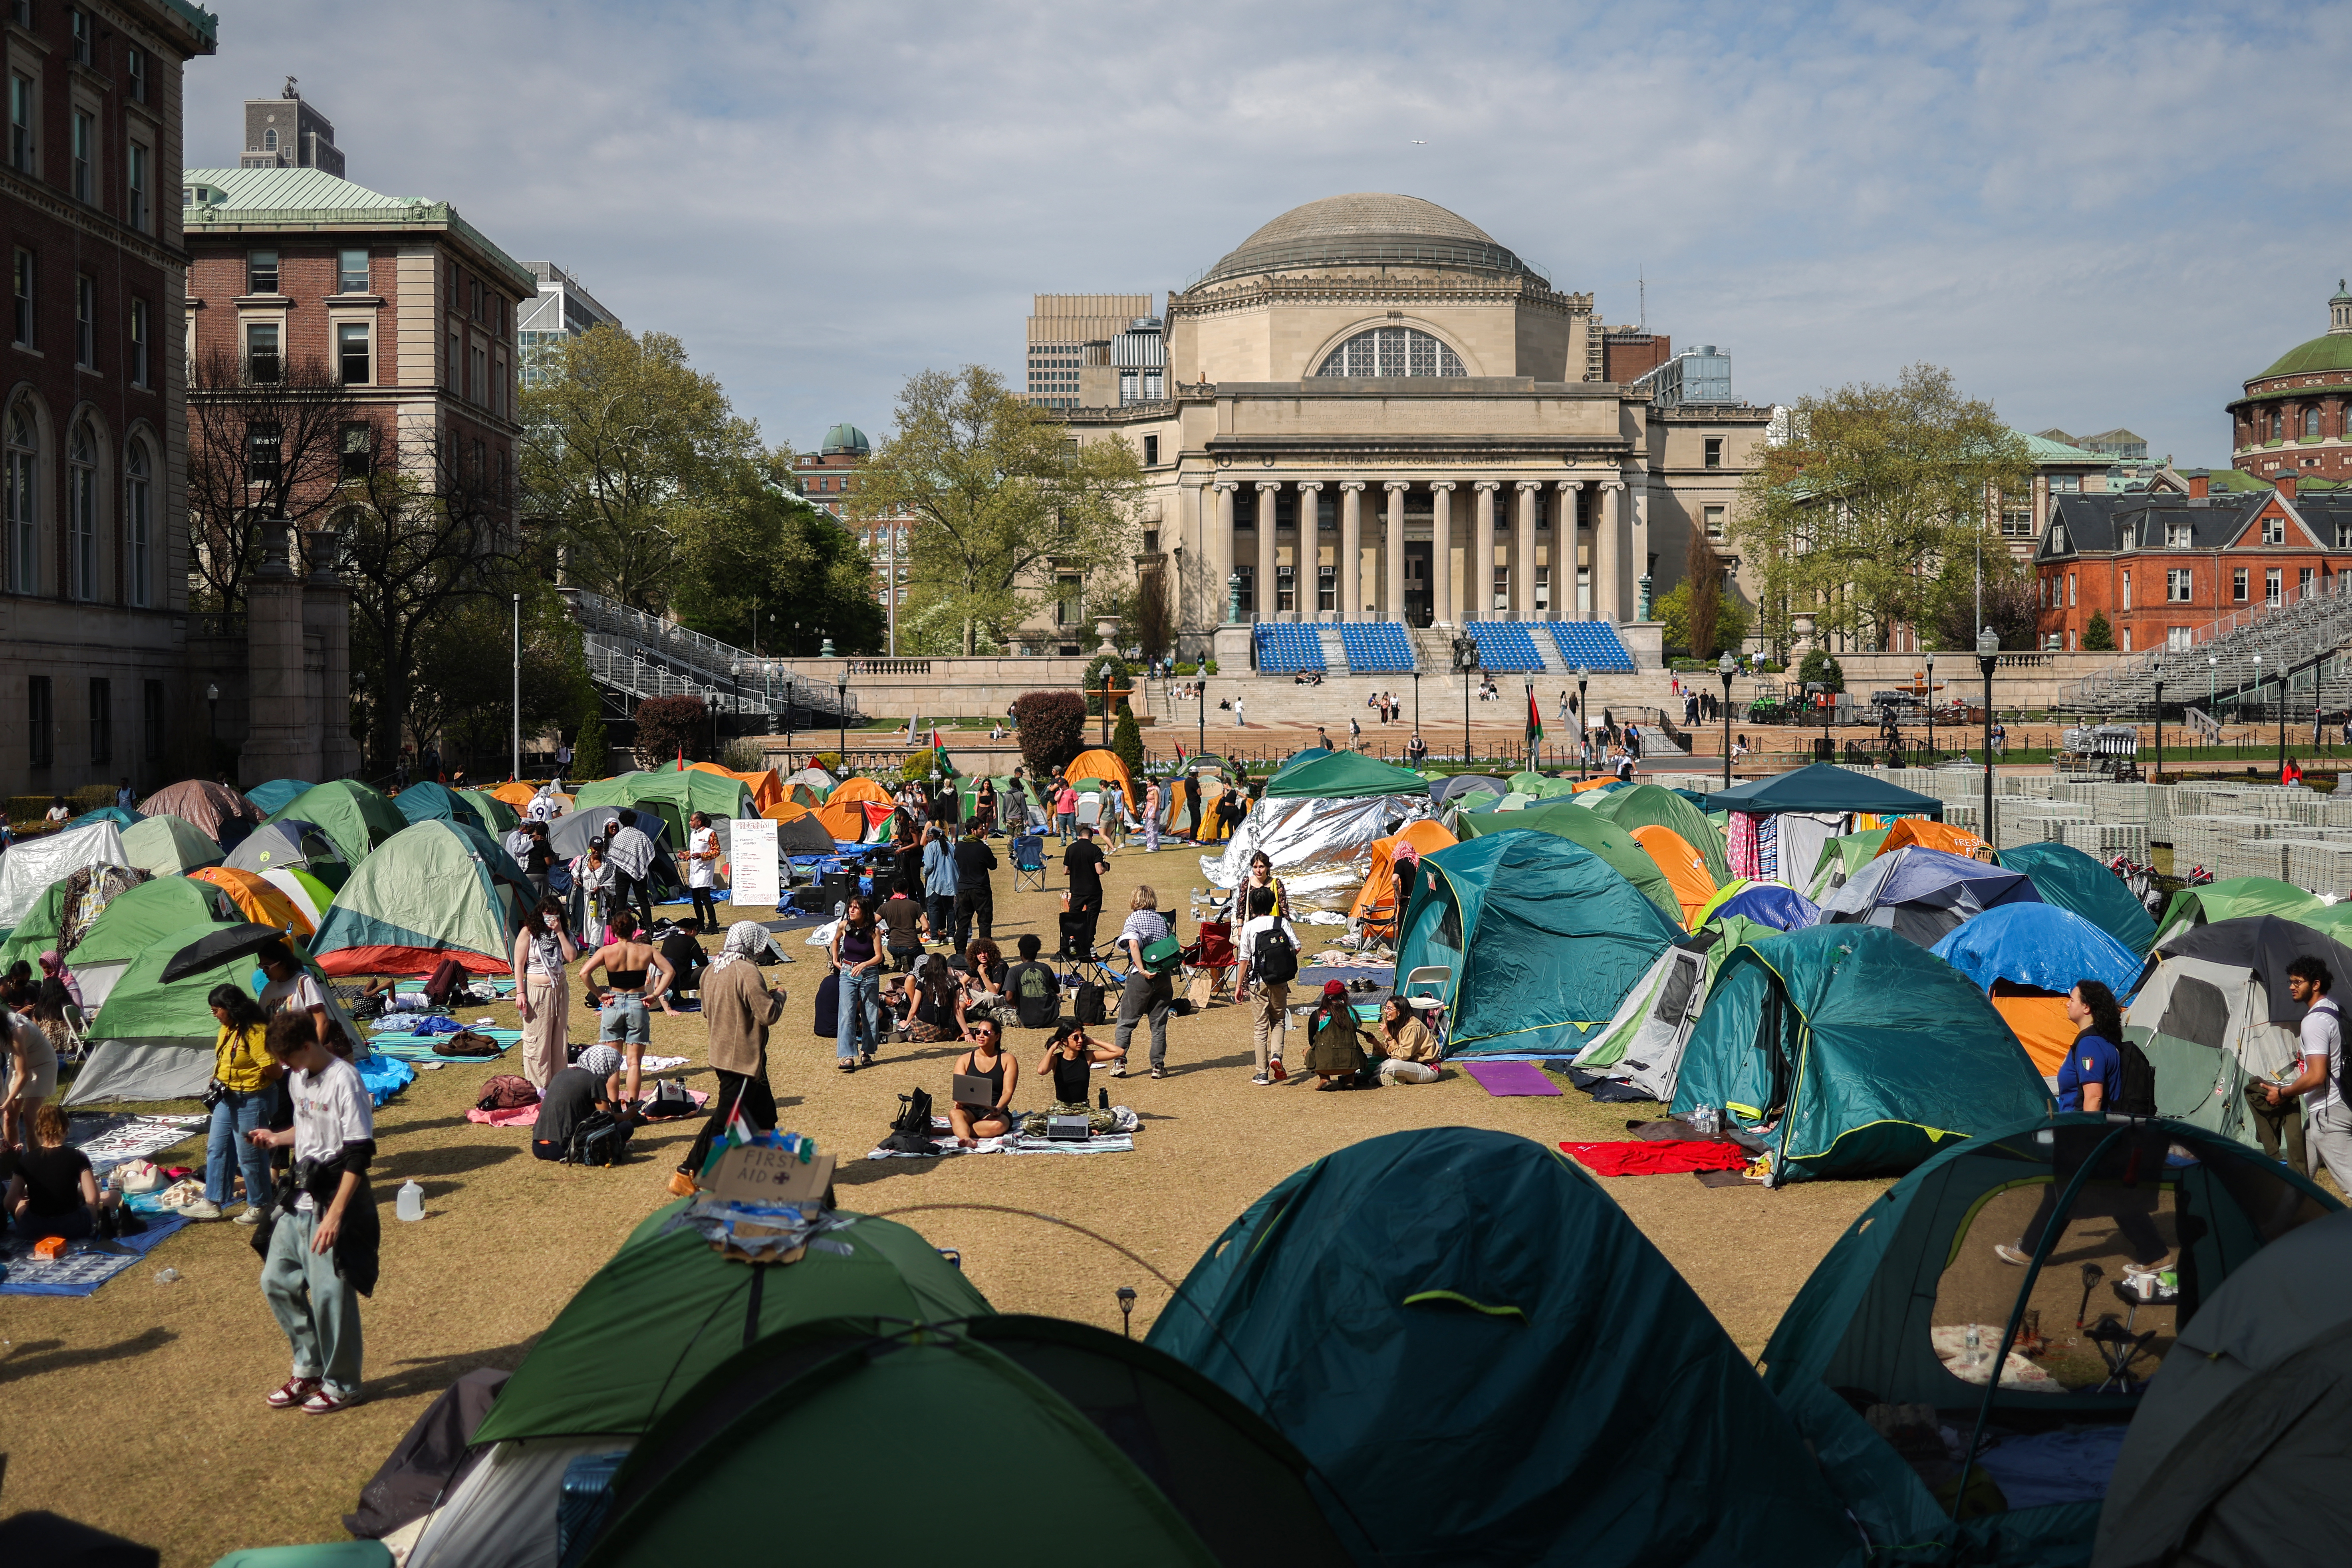 Columbia University's message to protesting students: disperse by 2 p.m. or face suspension